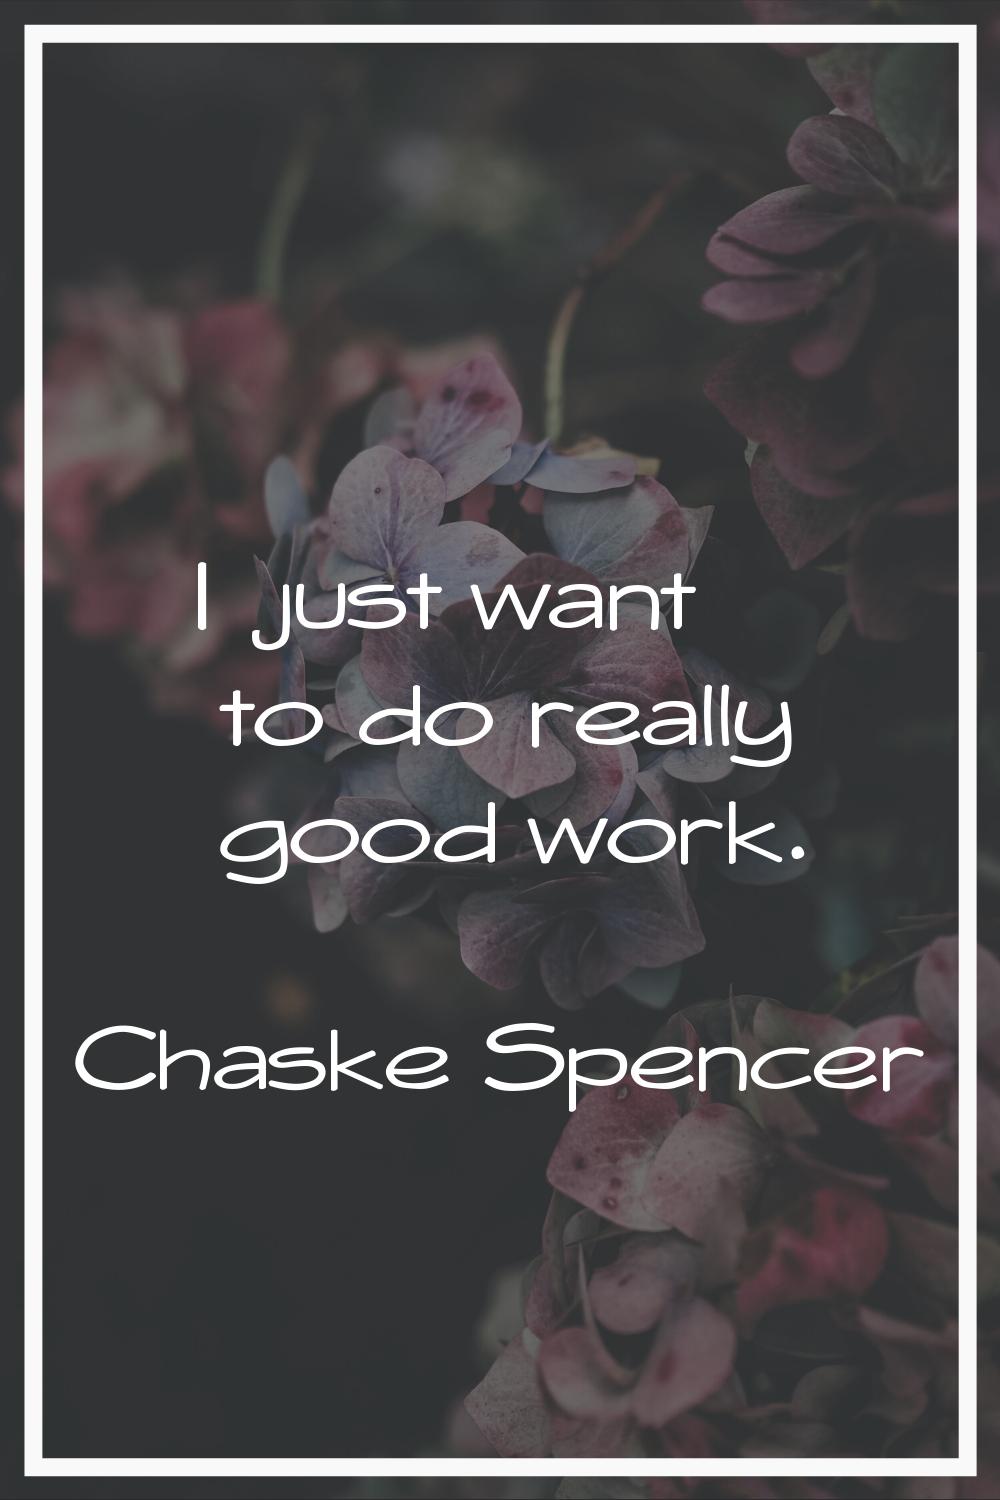 I just want to do really good work.